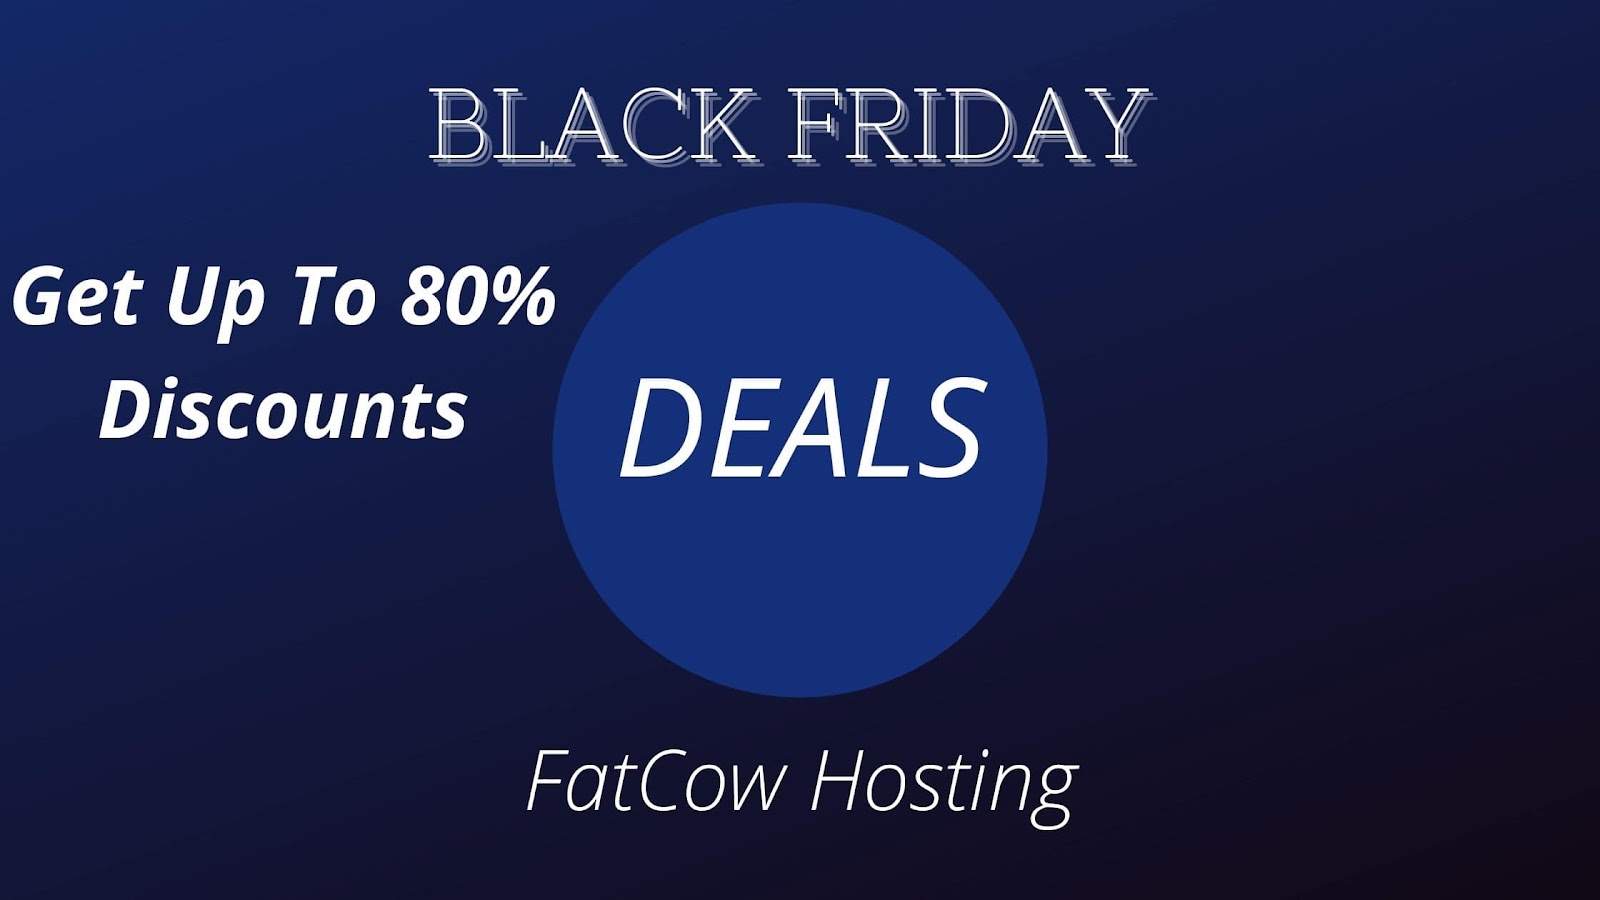 FatCow: Get Up To 80% Discounts